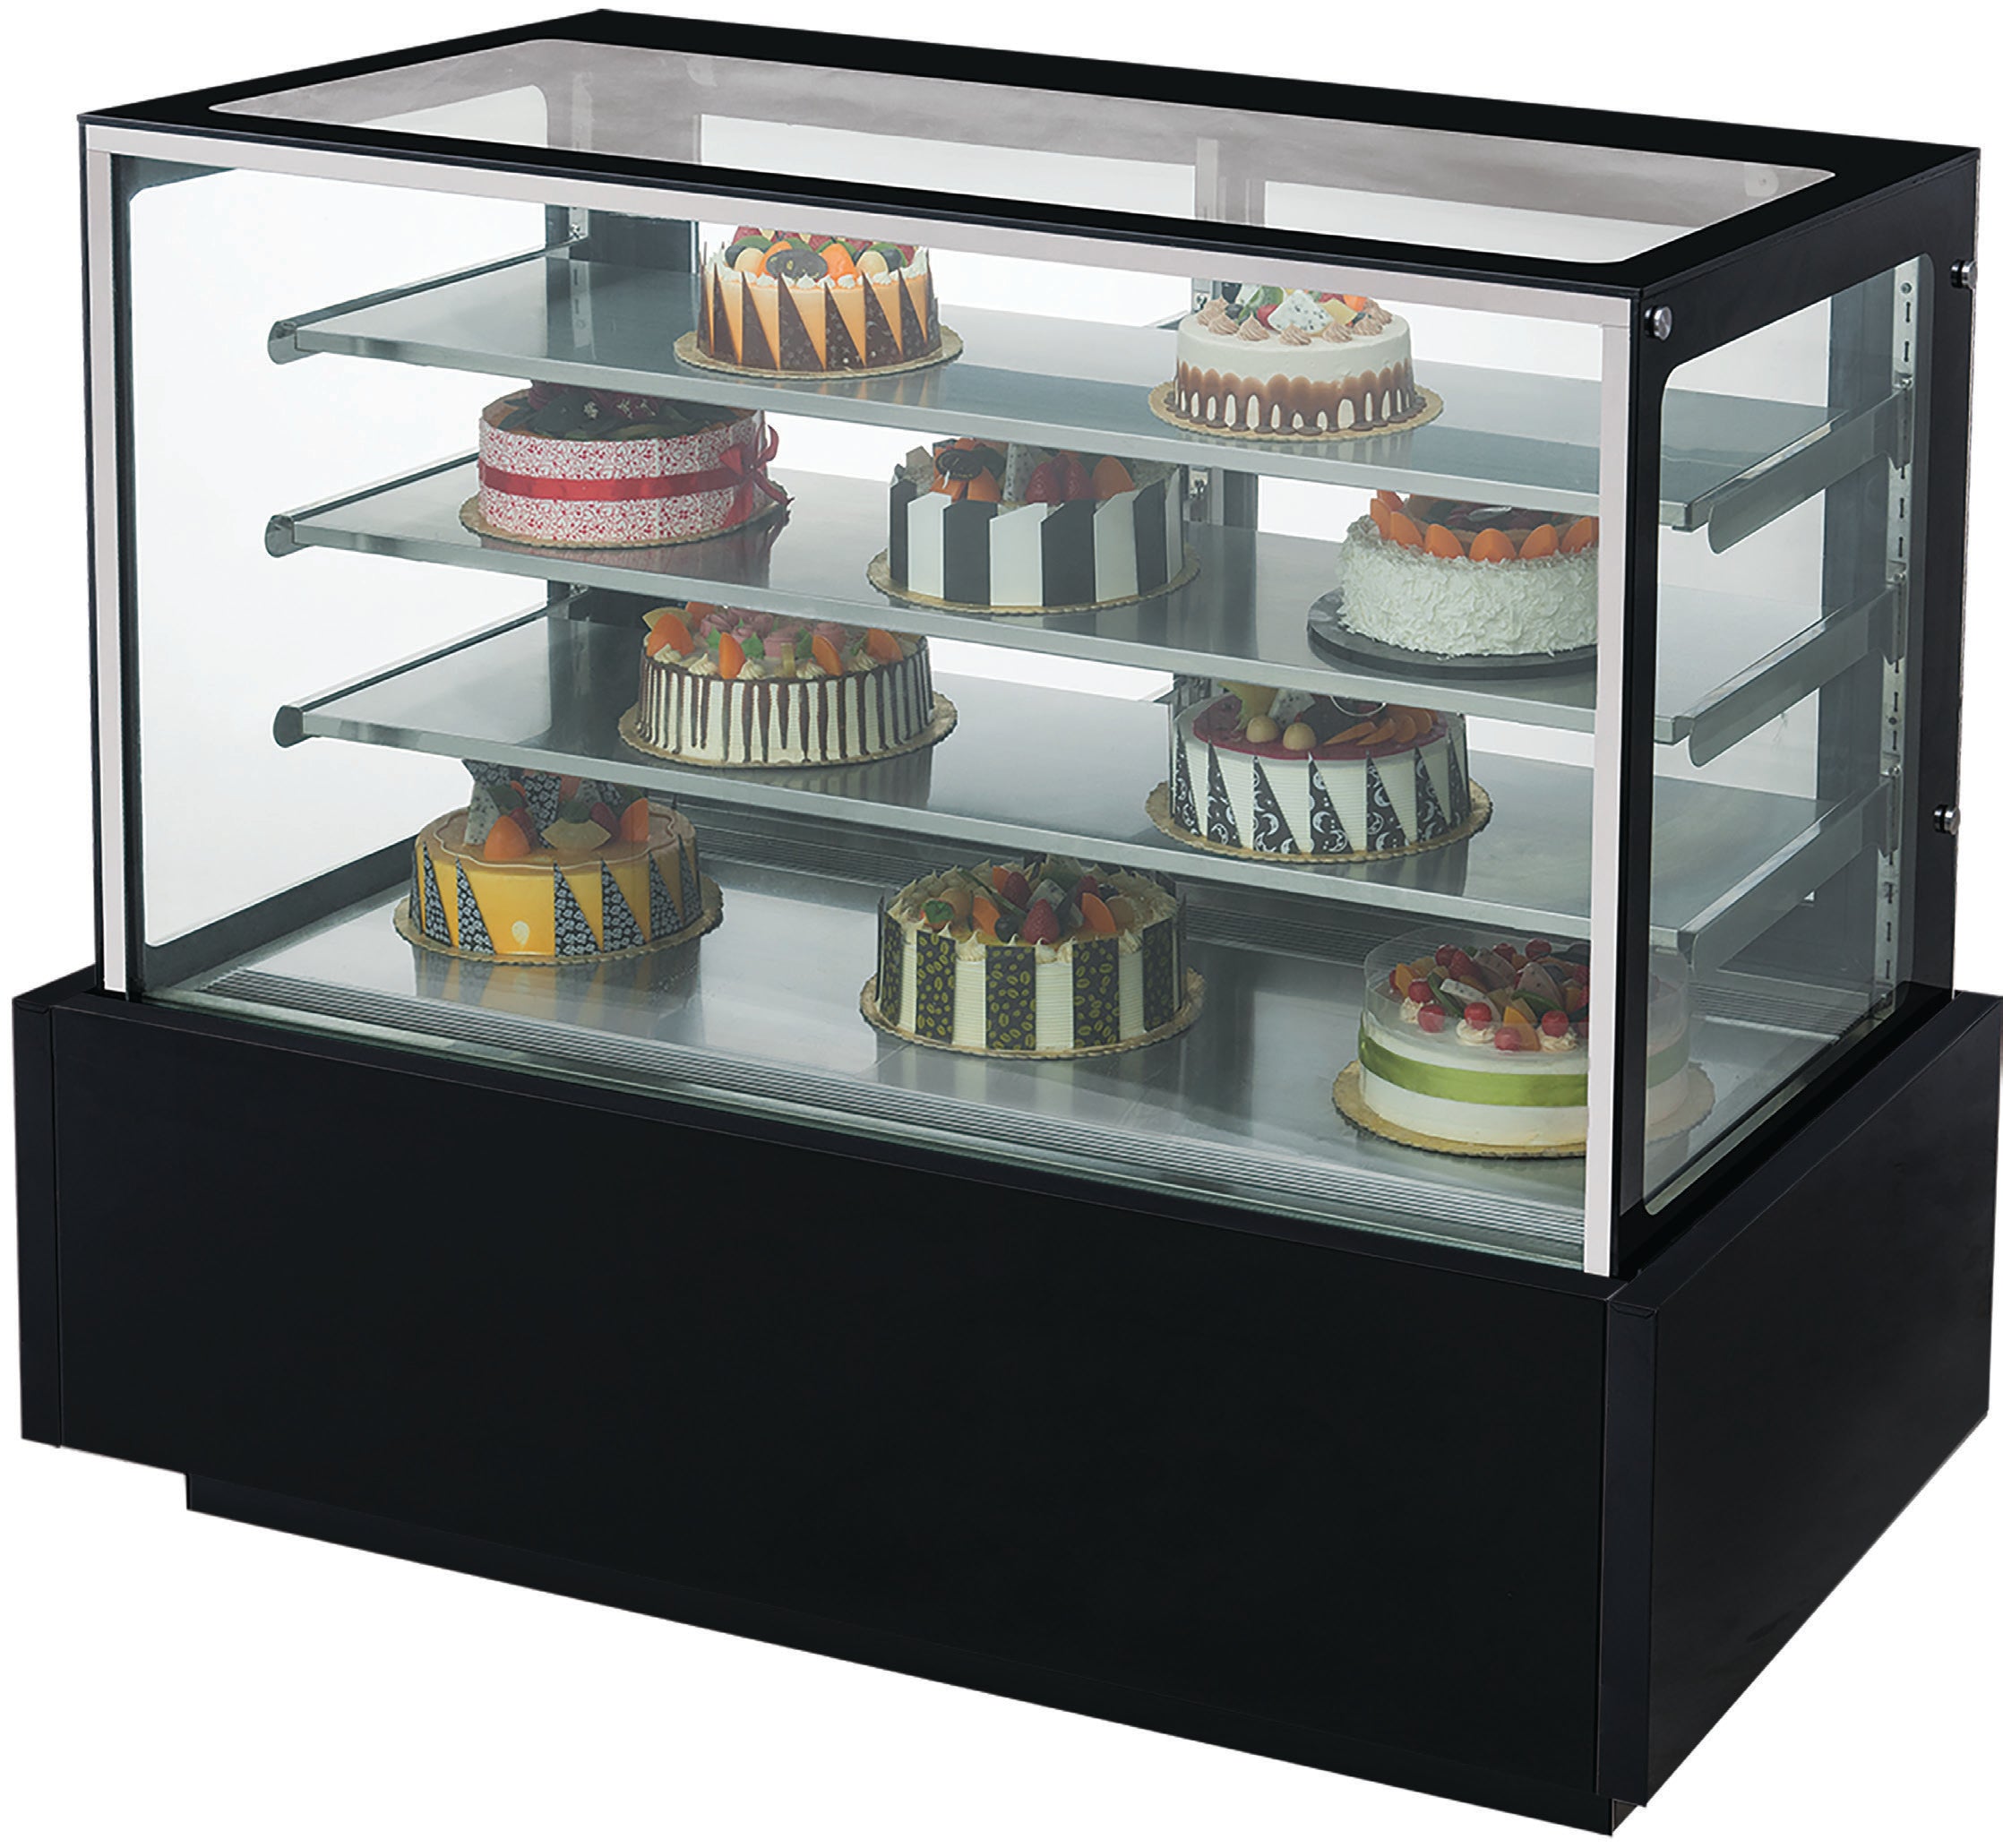 Chef AAA - TDM60R, 60" Straight Glass Bakery Case